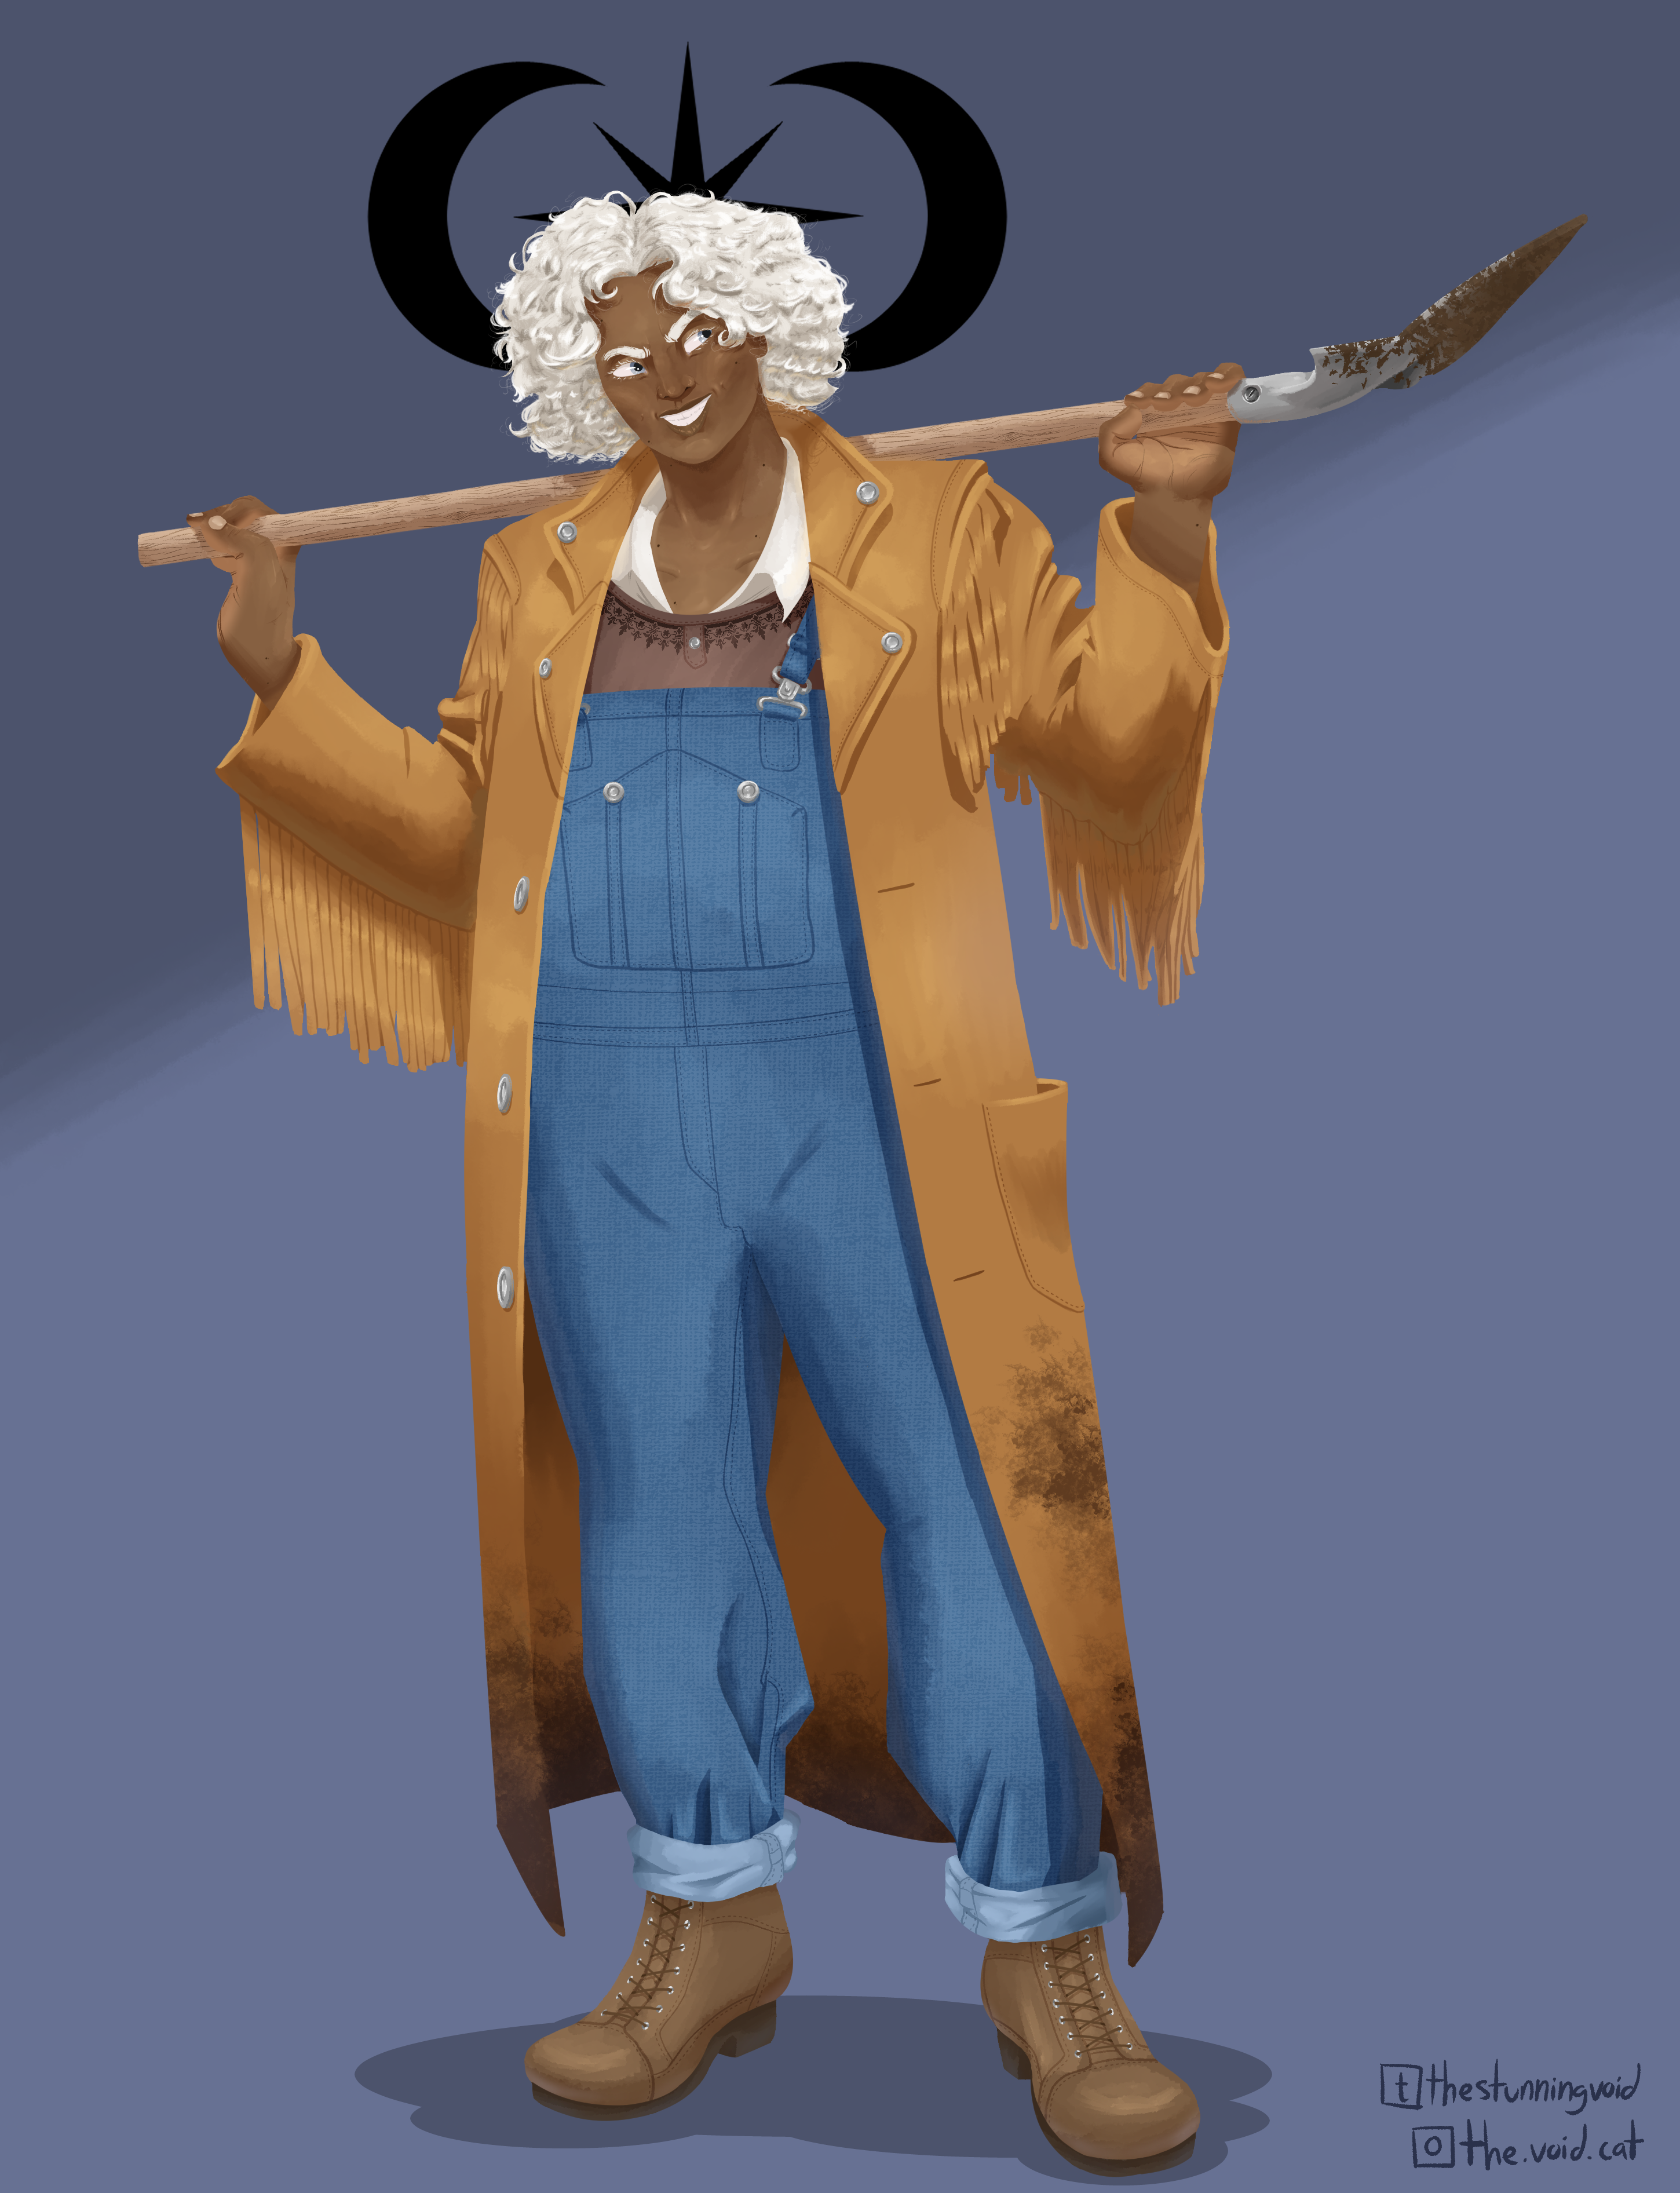 A painting of Mama, an older woman with brown skin and curly, white hair. She's standing with both her arms up, holding a dirty shovel across her shoulders. She's waring a long, orange duster with fringe on the arms and shoulders, and it's dirty at the bottom. Beneath it, she's wearing blue overalls and sturdy work boots. Behind her head, there's a black sigil in the shape of two crescent moons and a star. She's smiling deviously.